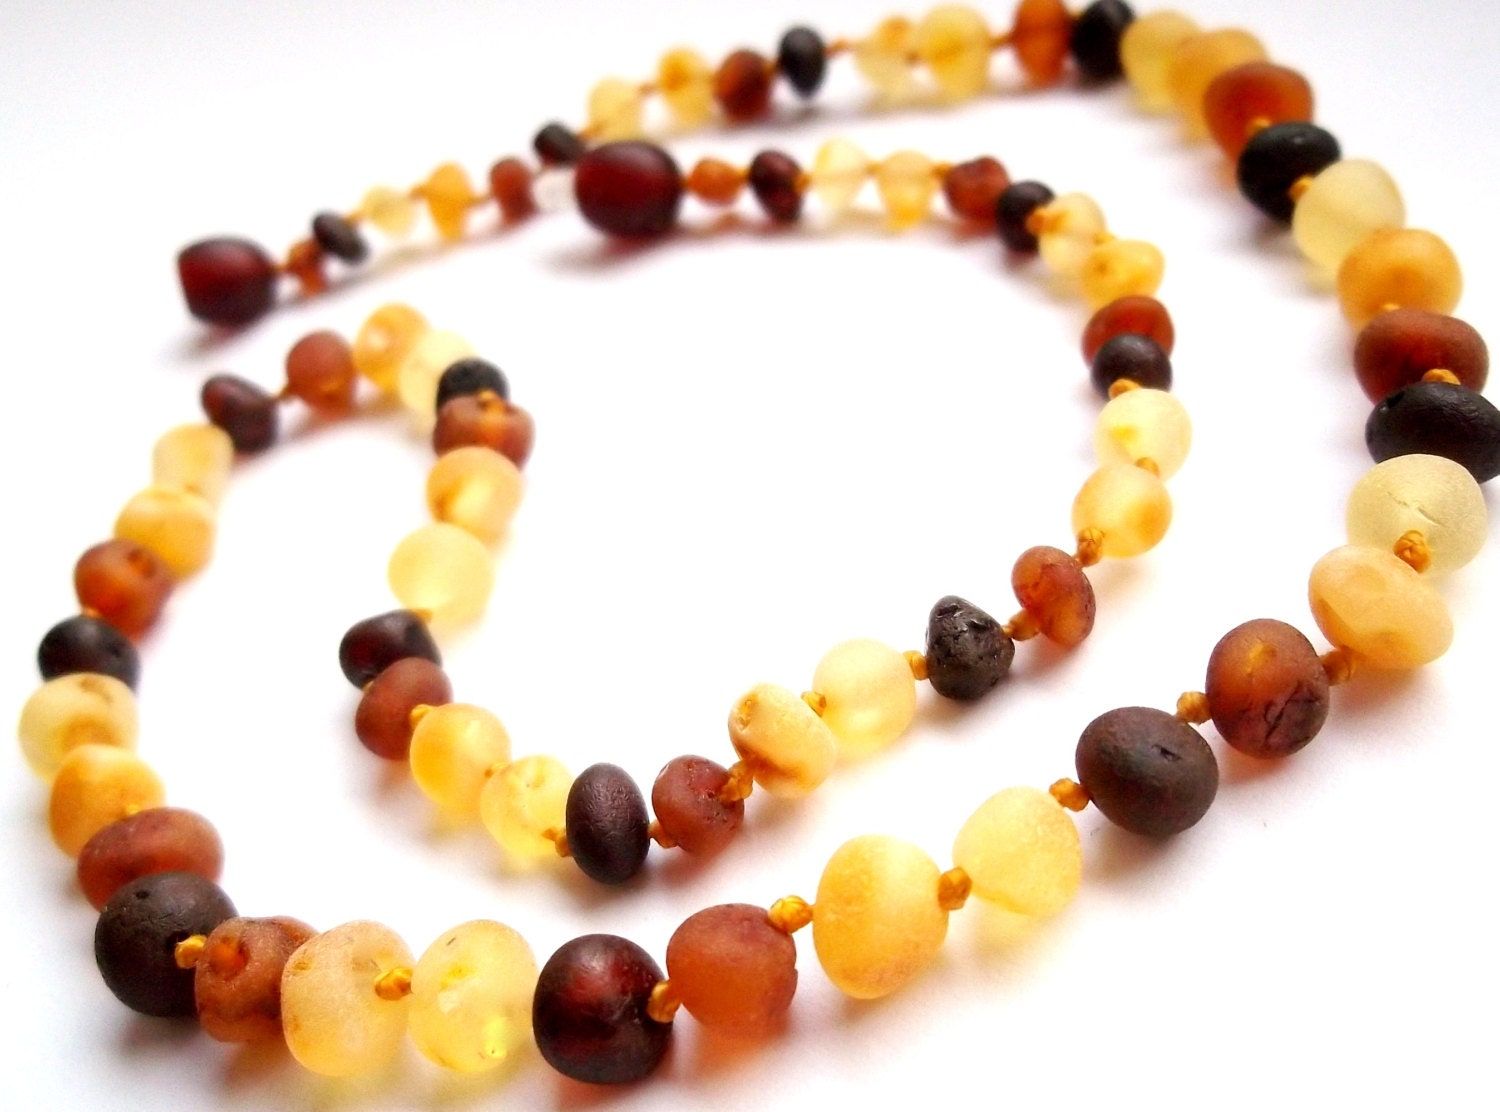 Raw unpolished  Multicolor  Natural Baltic Sea Amber Necklace 17.7 inches . High quality amber beads.